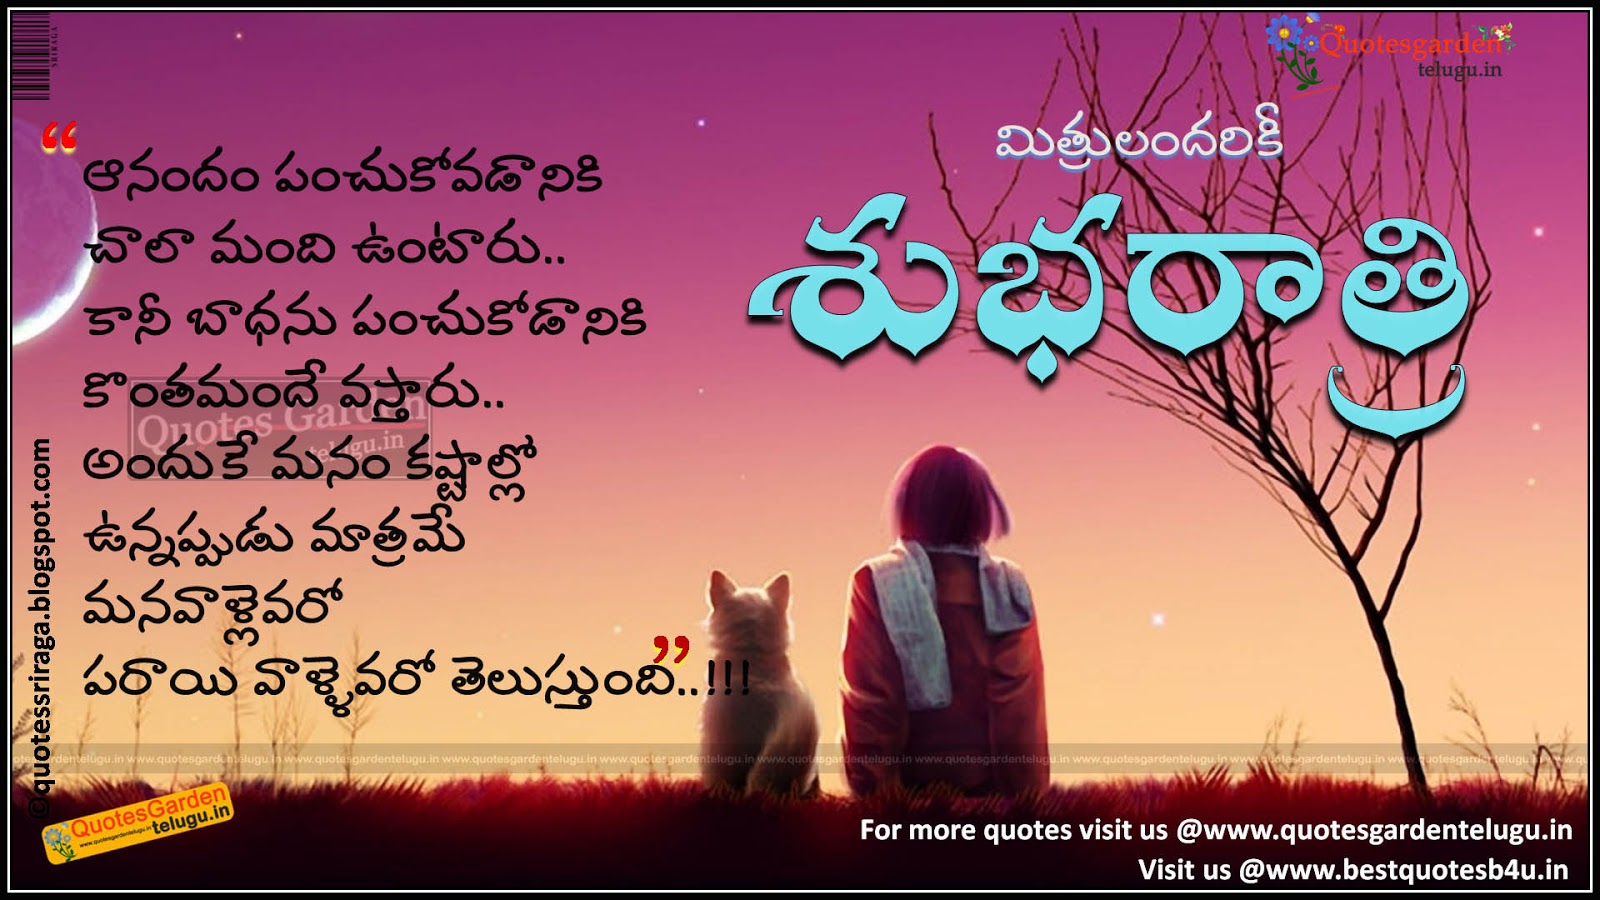 Telugu Good Night Sms For Friends Can This Last Forever